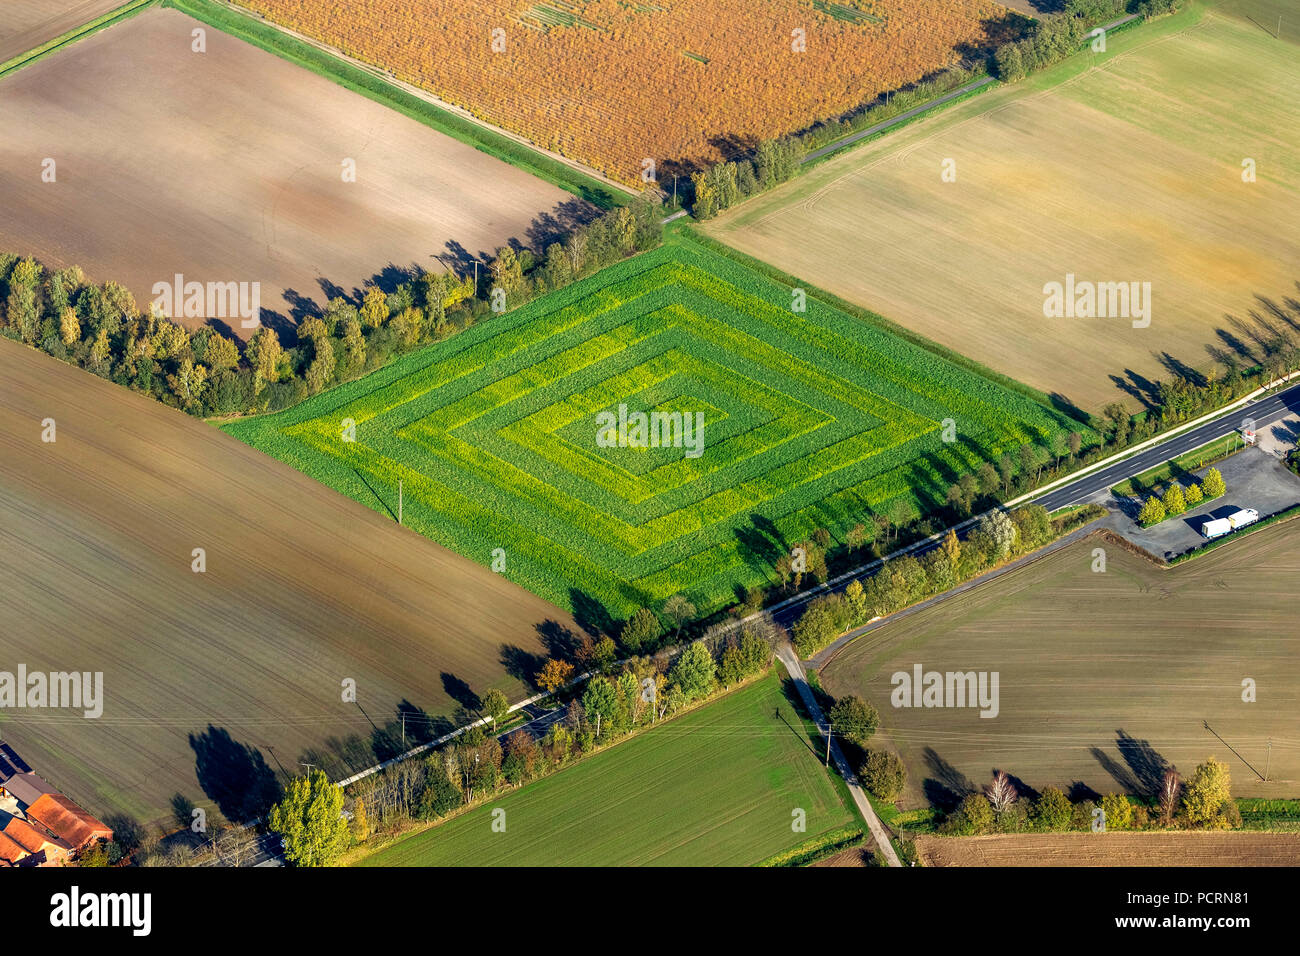 Patterned corn field in Lower Saxony, agriculture, Glandorf, Lower Saxony, Germany Stock Photo